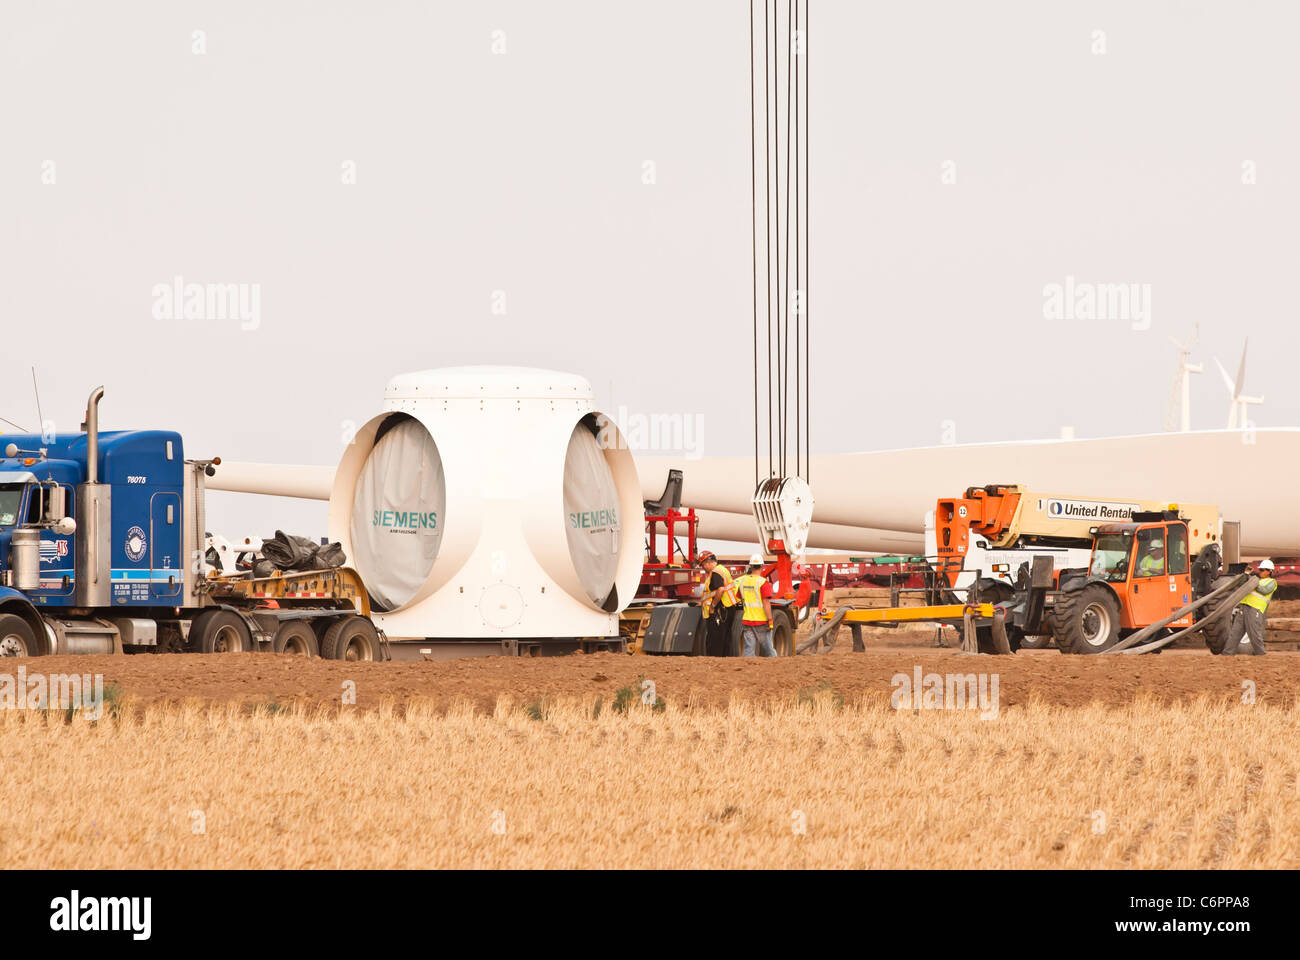 Components for a horizontal-axis wind turbine are being assembled on a tower in a construction site near Amarillo, Texas. Stock Photo